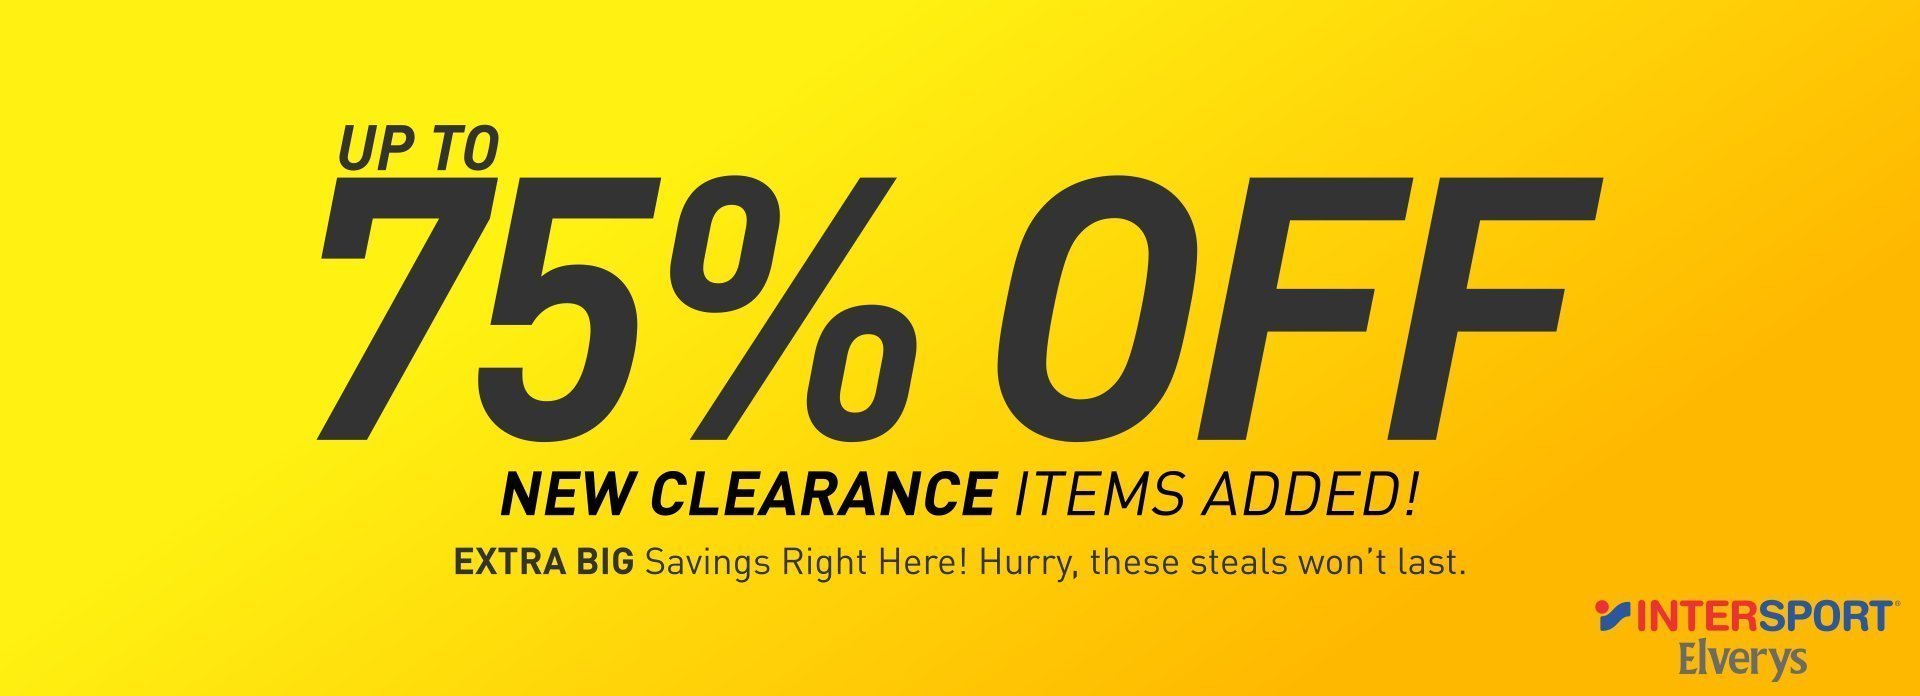 Clearance Curated Page 1920x696 Main Banner.jpg